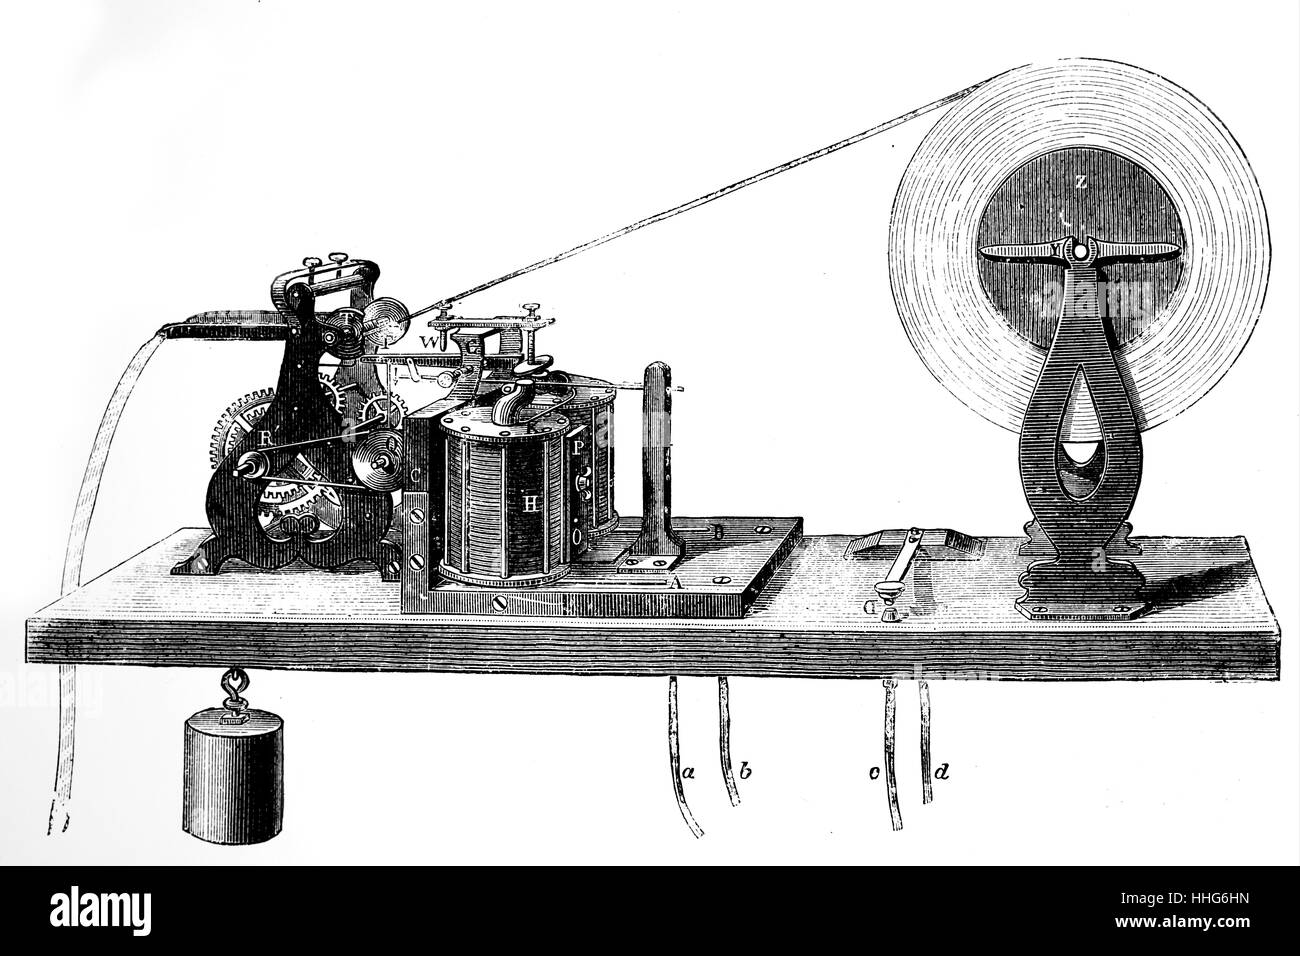 Morse printing telegraph, showing transmitting key and roll of paper attached to the receiving instrument. Stock Photo